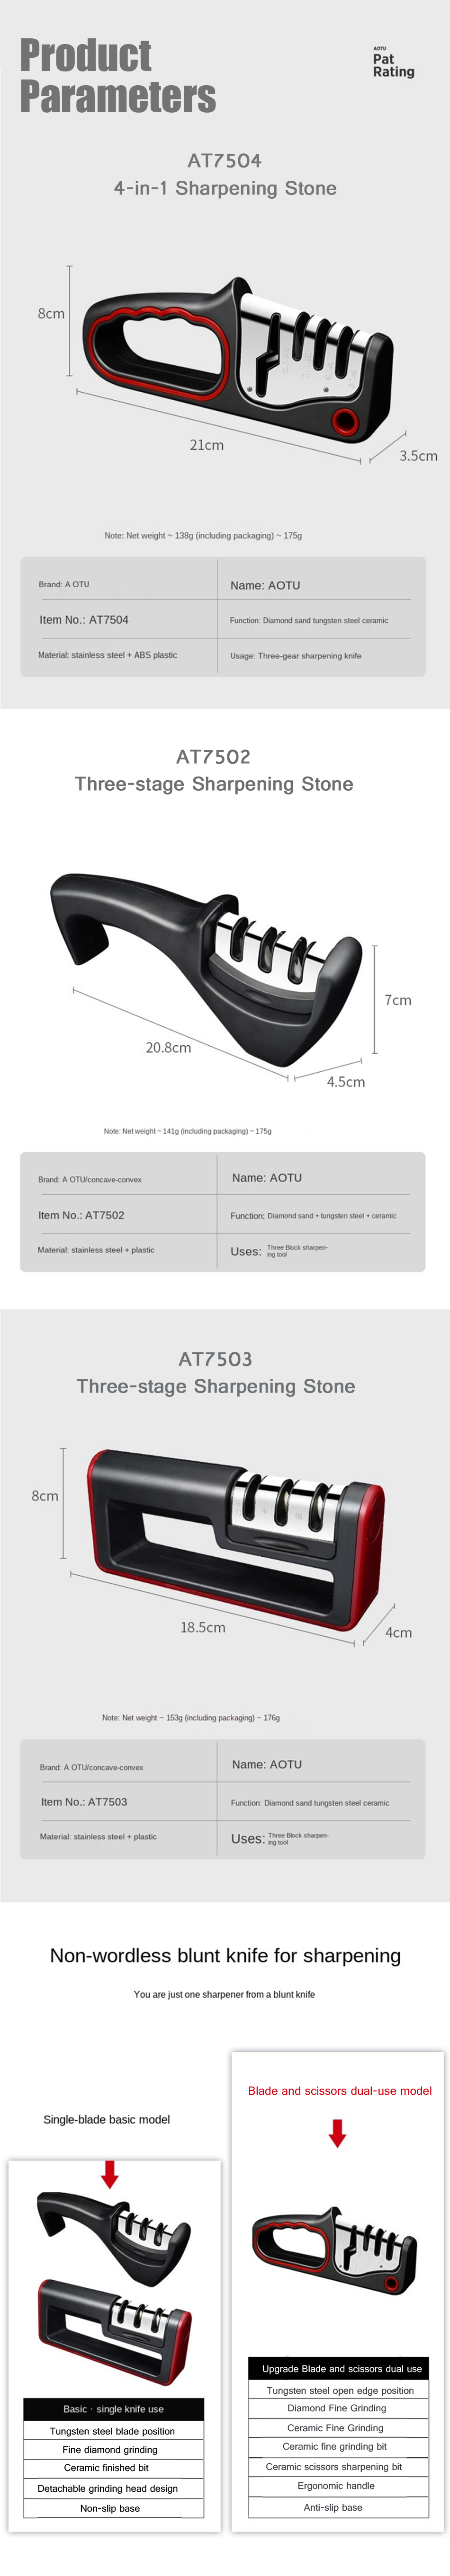 AOTU-AT7503-3-Stage-Sharpening-Stone-Household-Camping-Knife-Kitchen-Sharpener-Fine-Grinding-Ultra-f-1796356-1